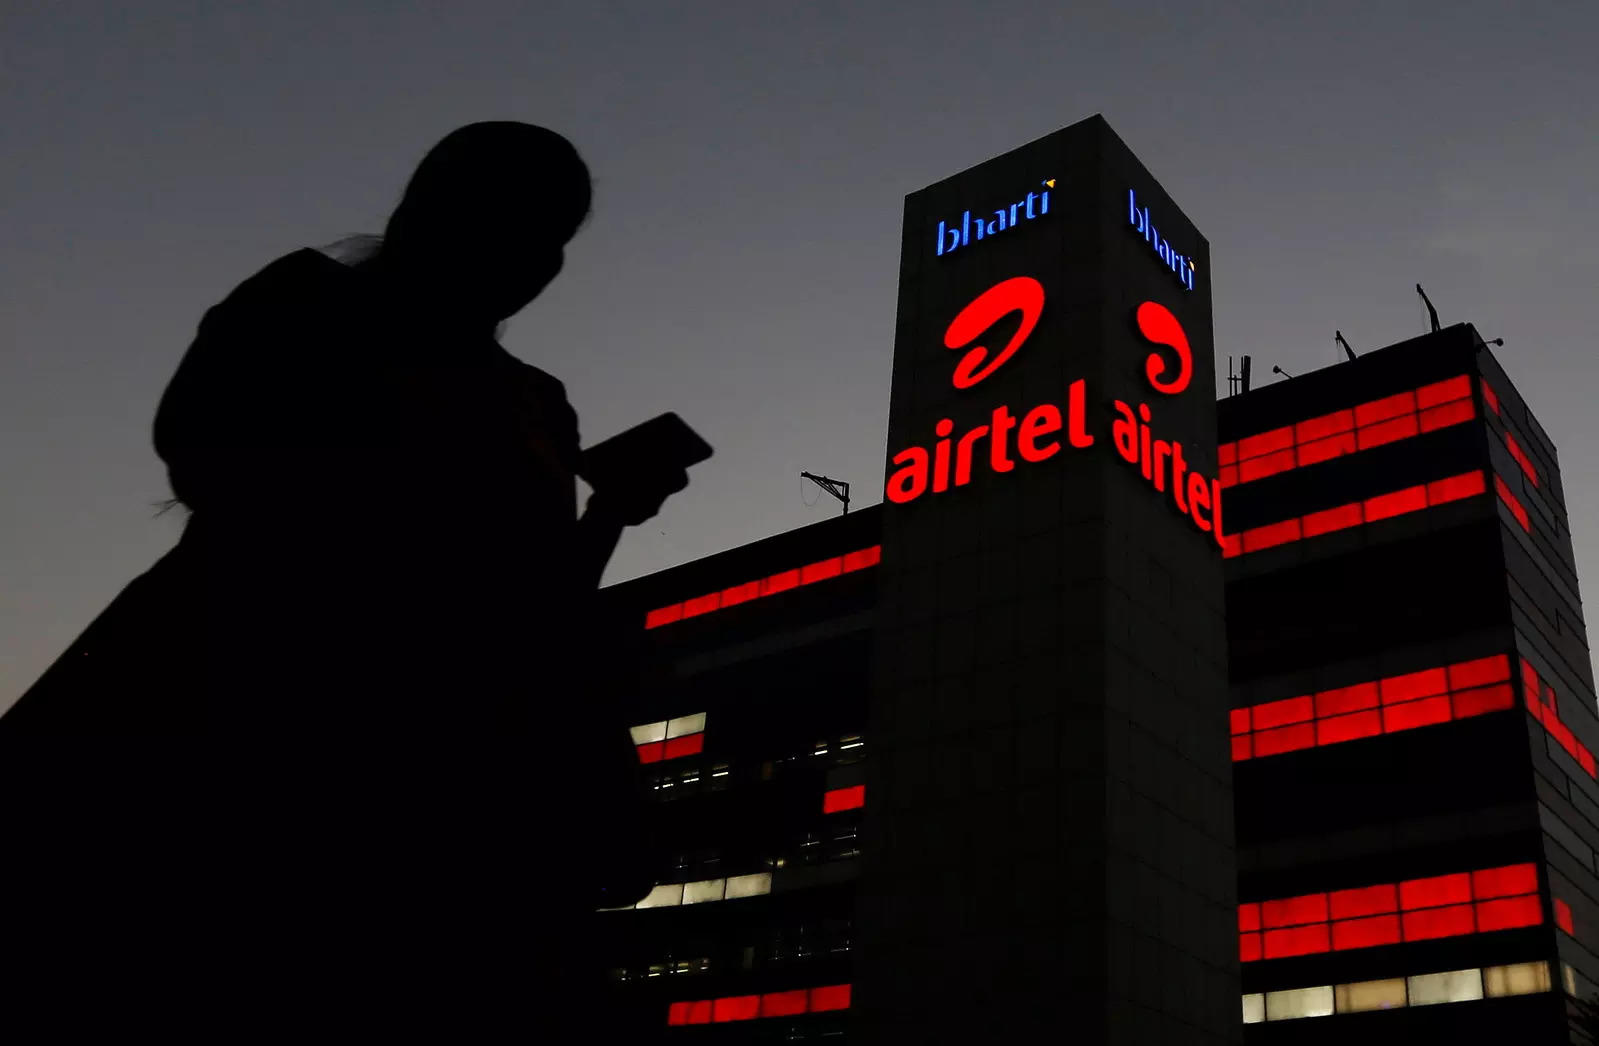 Airtel shares rise 2% in BSE early trade a day after Rs 21,000 crore rights issue announcement